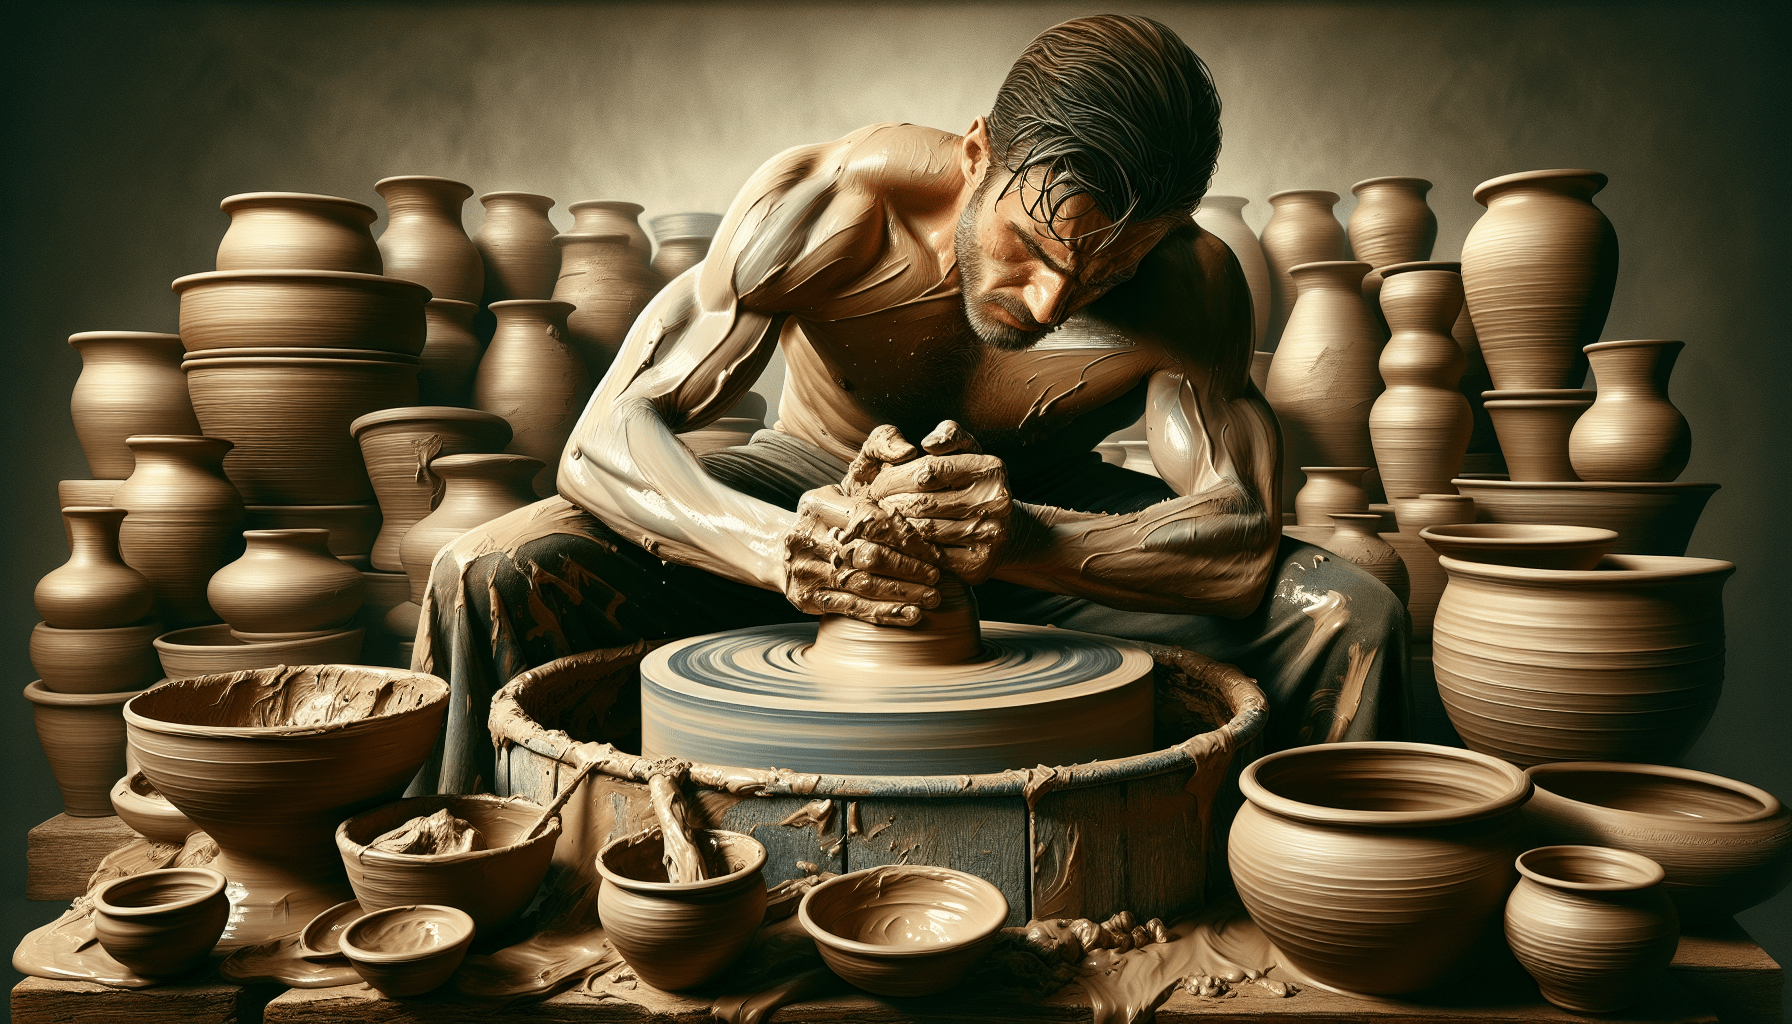 Is Pottery Hard On The Body?